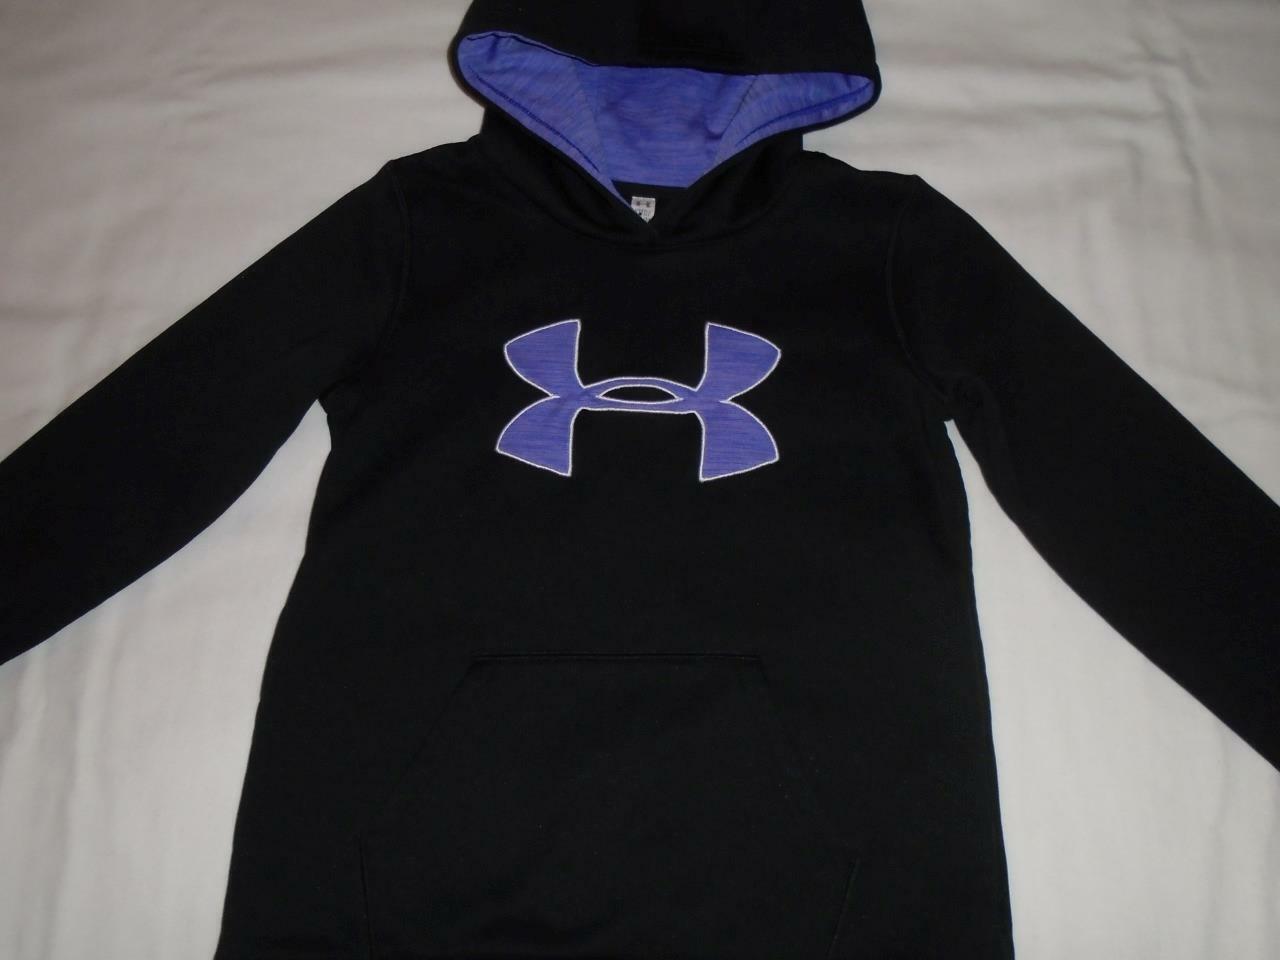 Girls Size Ymd Under Armour Hoodie Black & Purple Cold Gear Very Good Condition